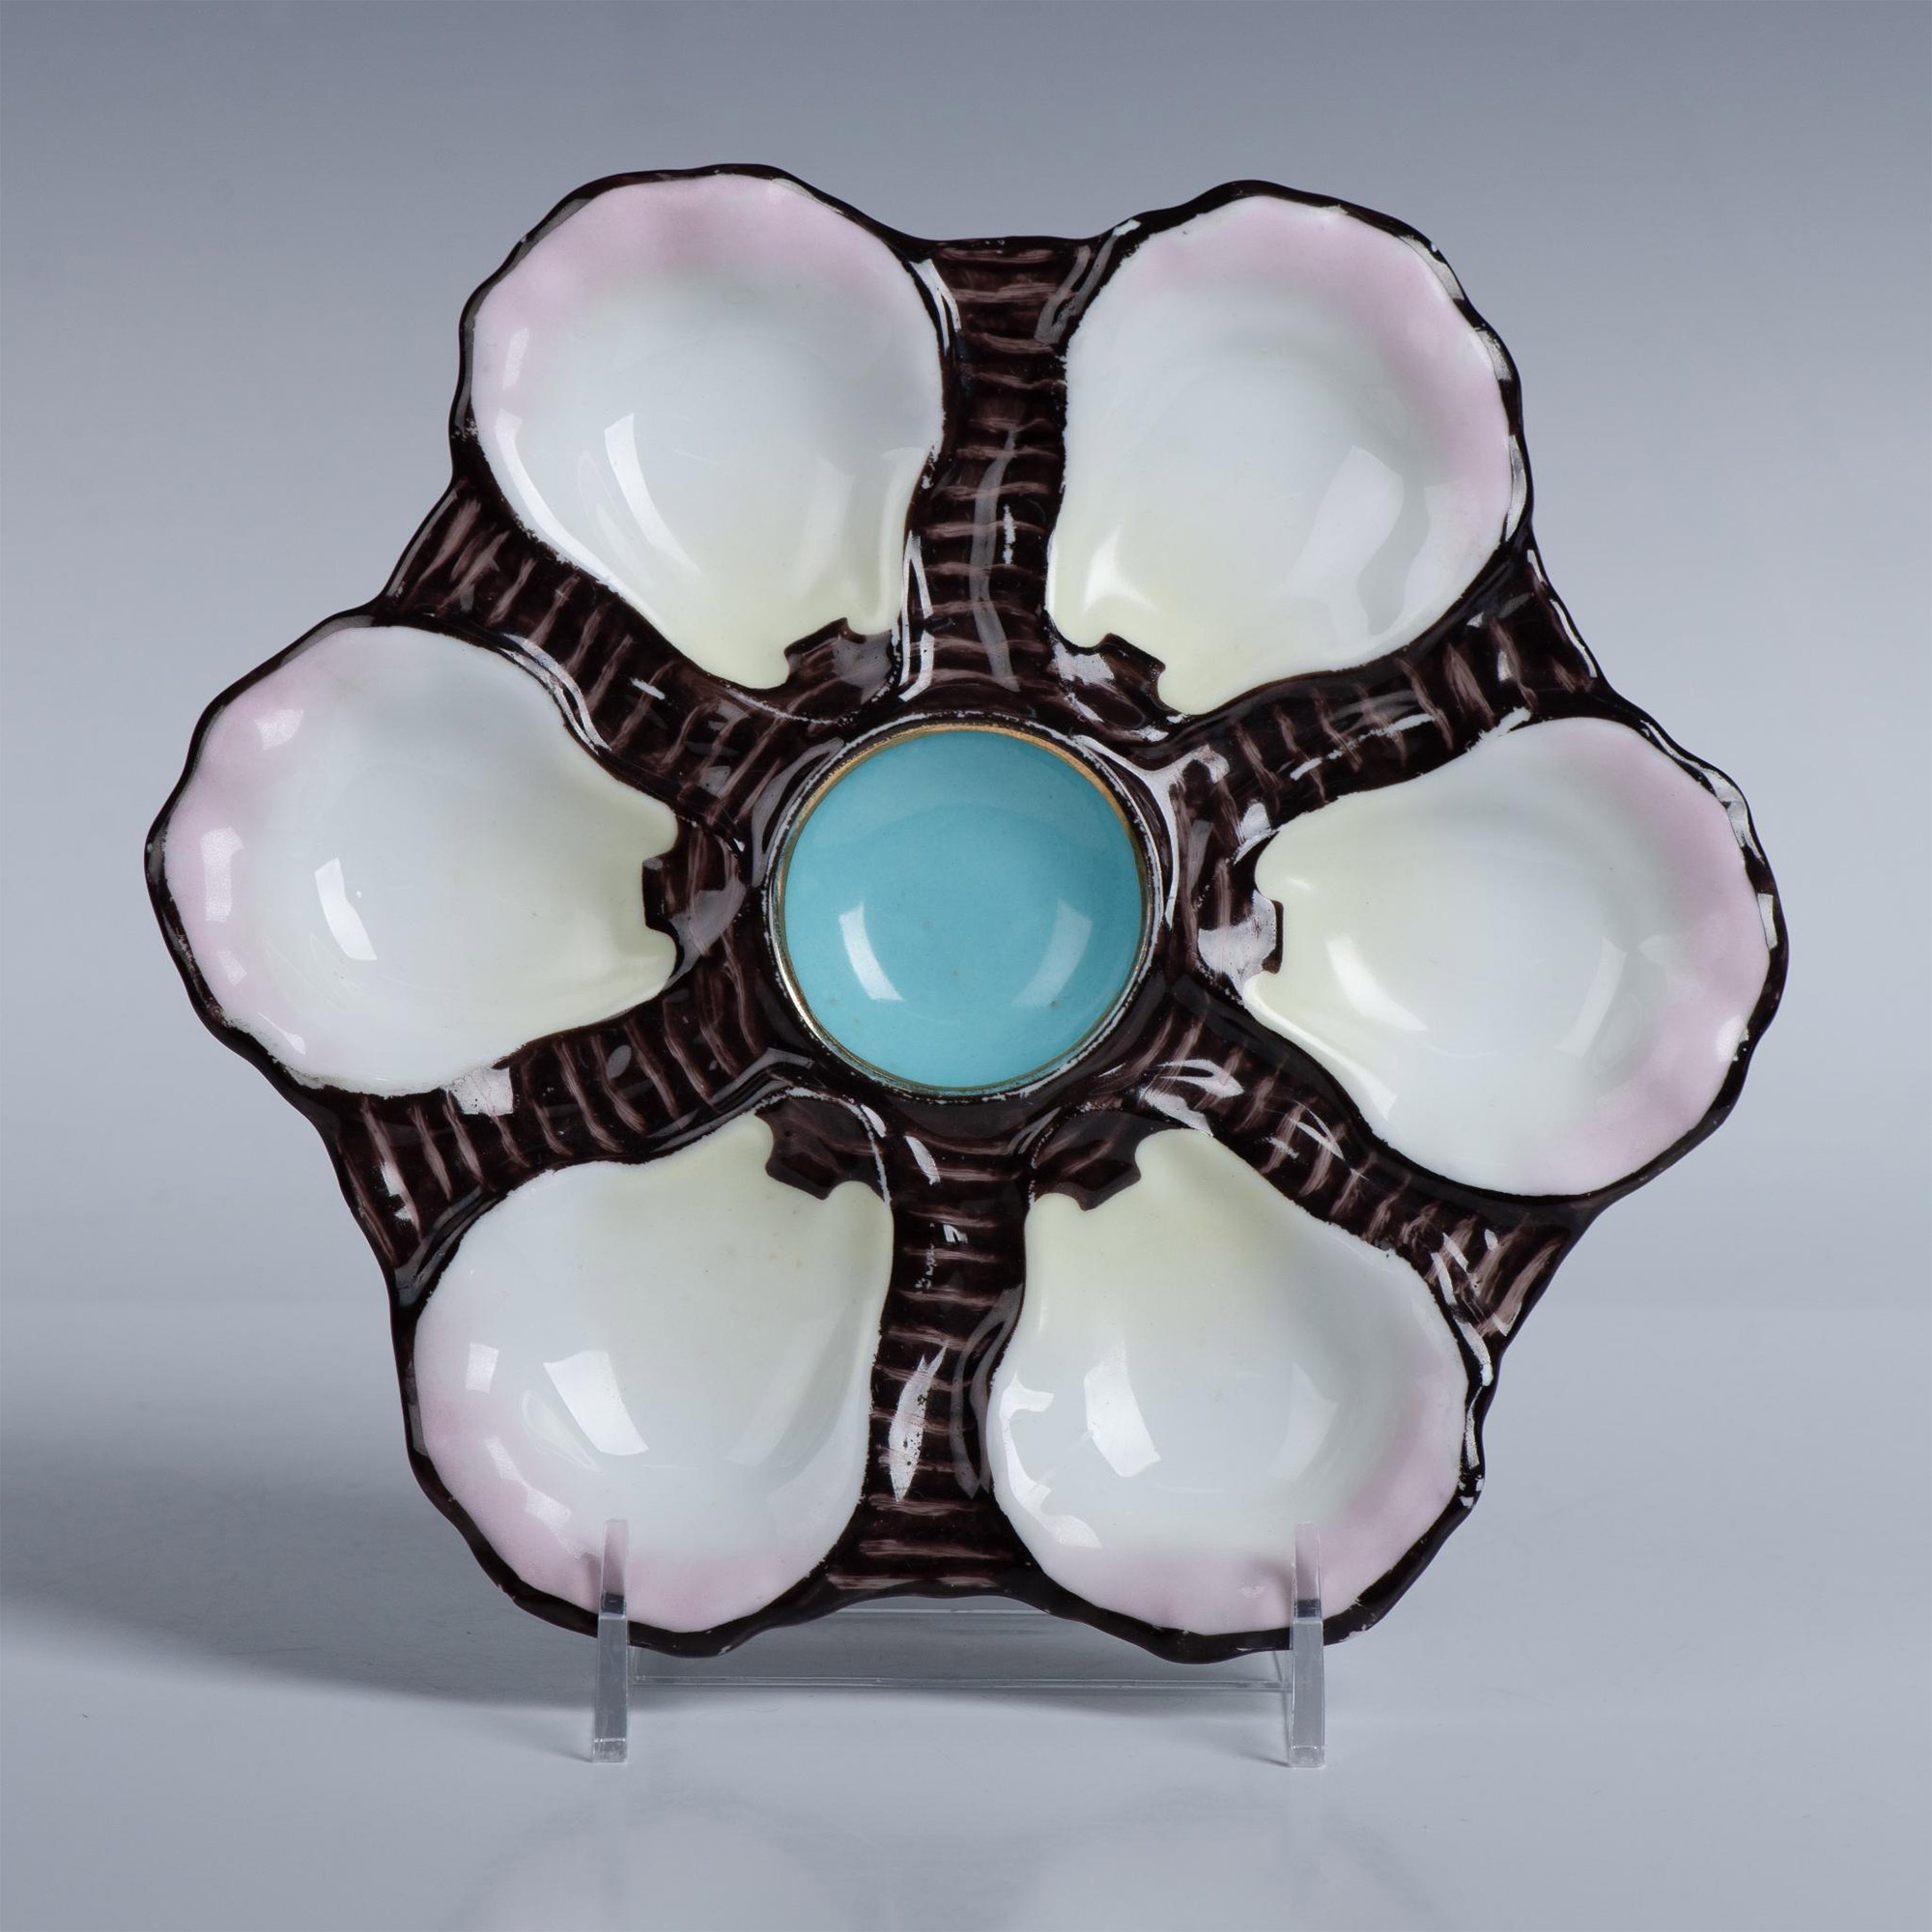 6-Well Porcelain Majolica Style Oyster Plate